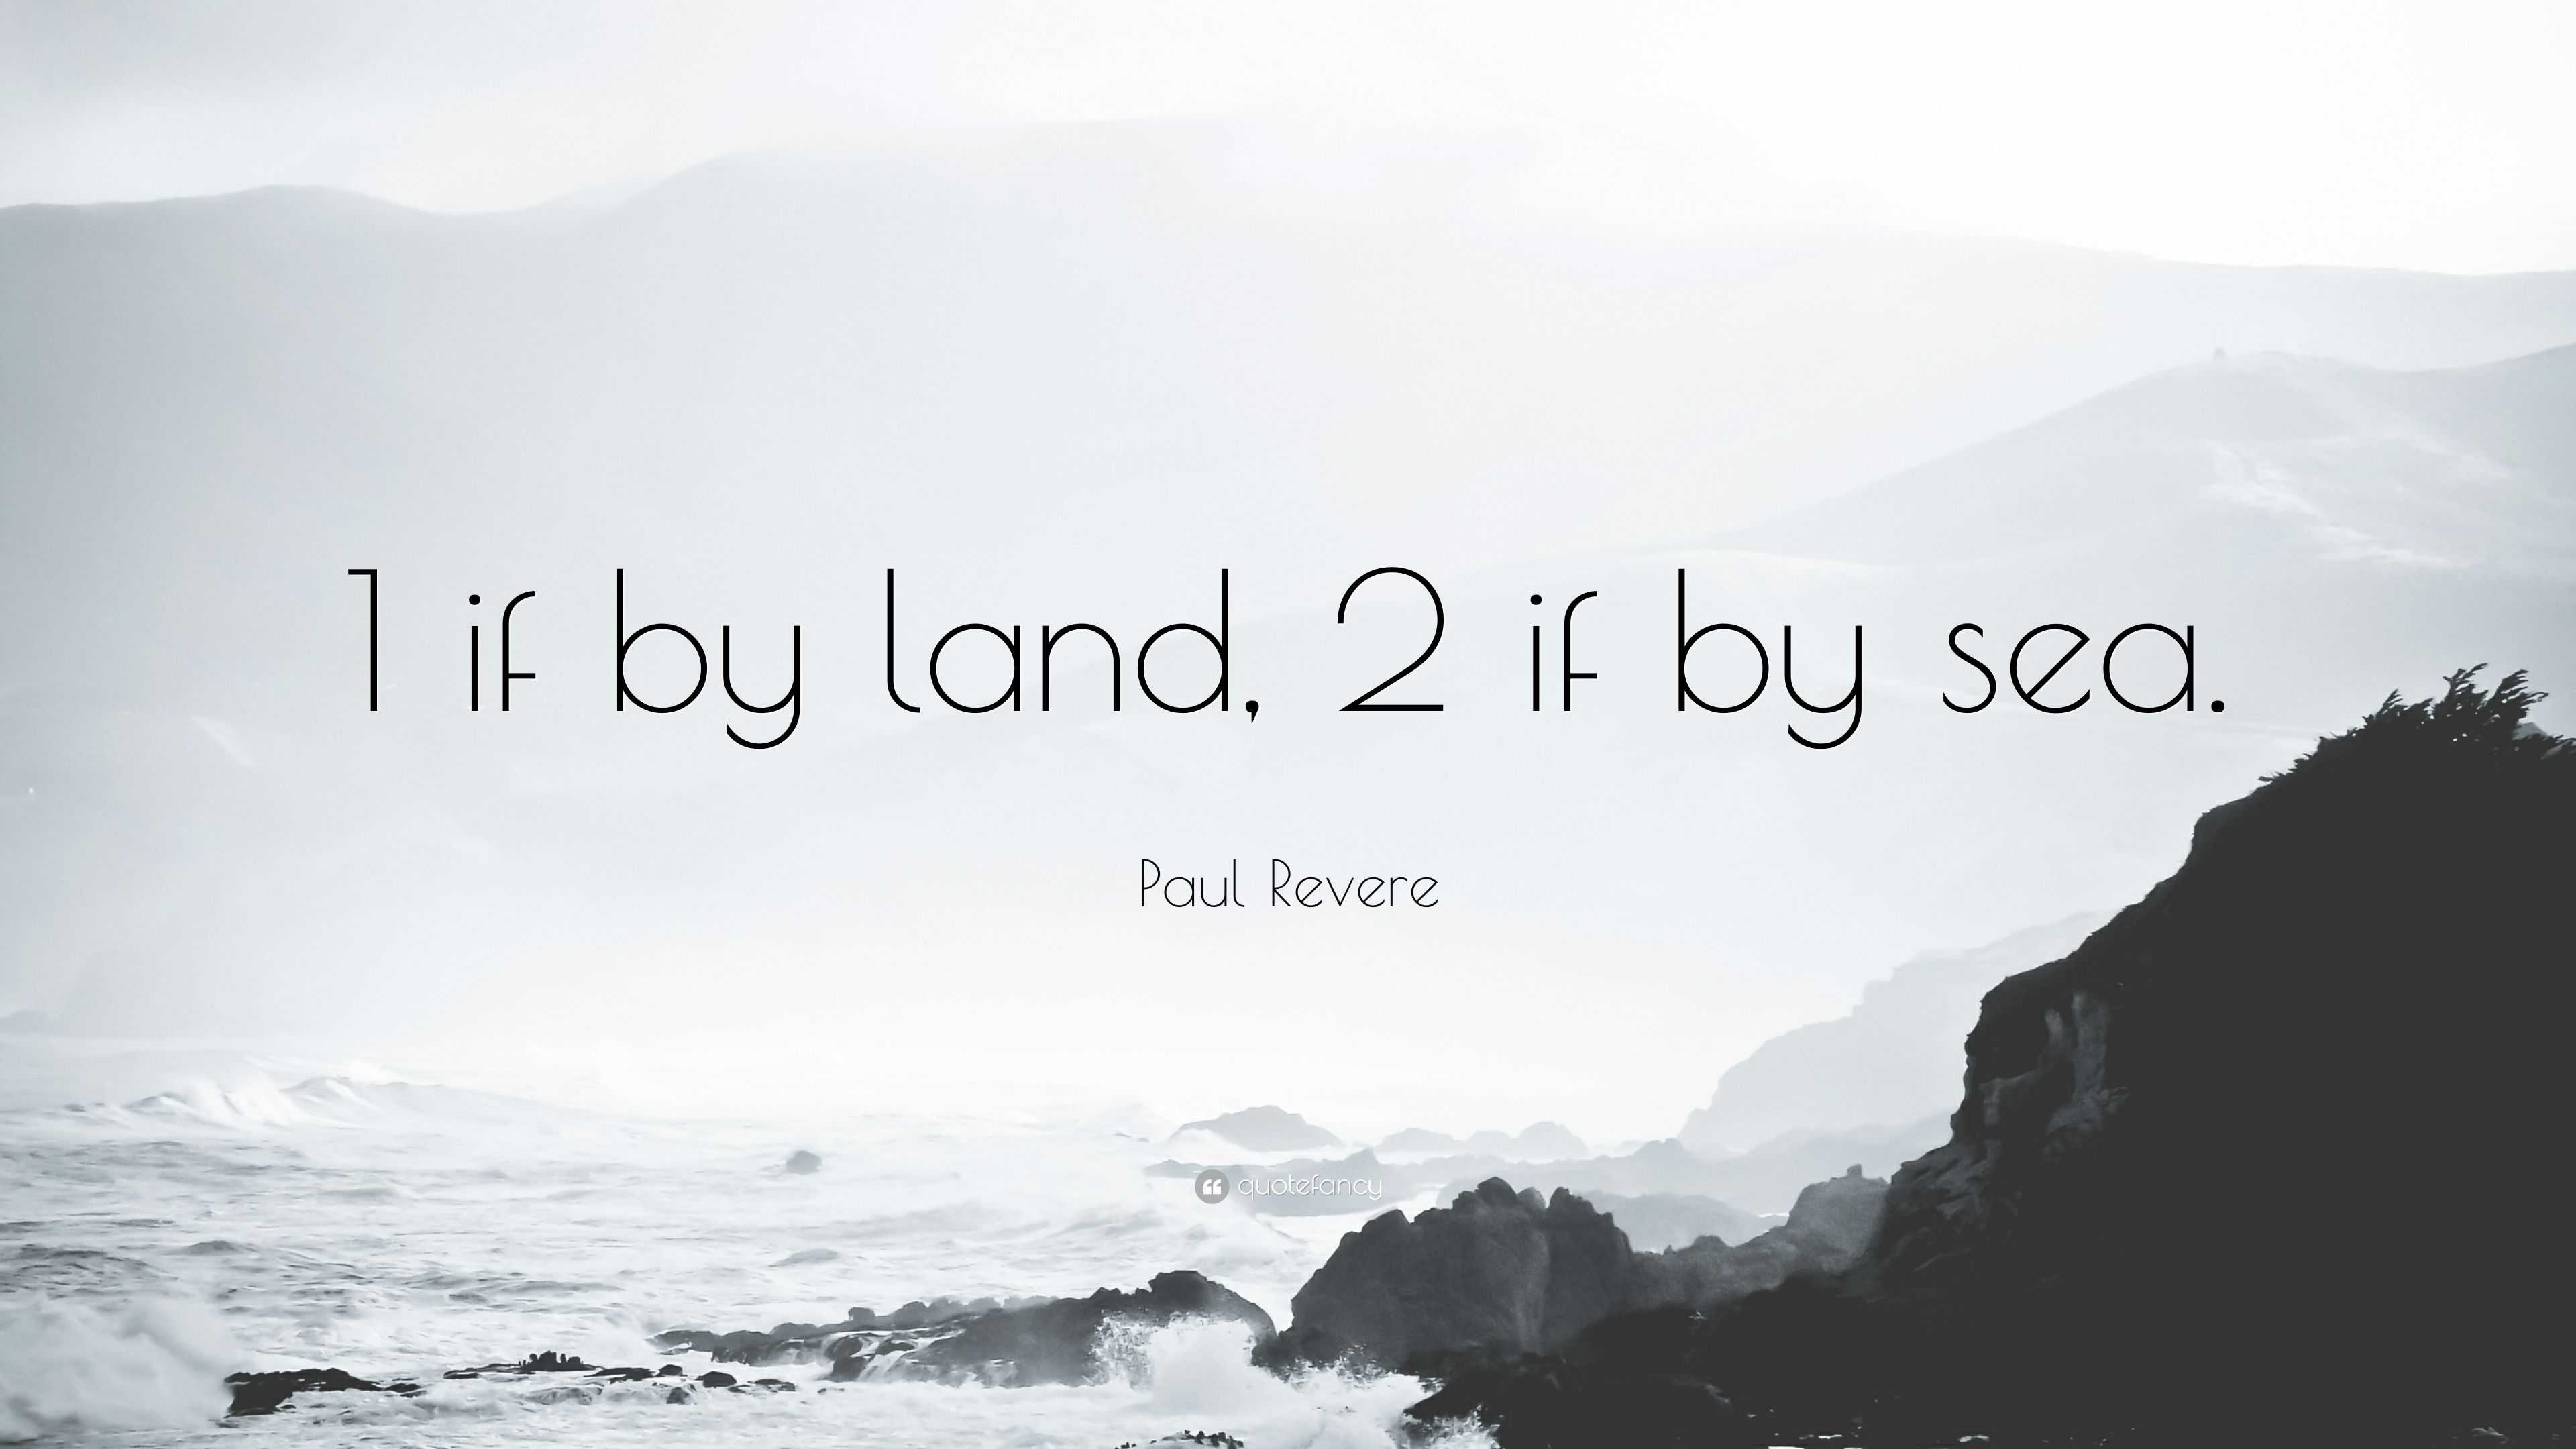 quot;One" If By Land, U2 If By Sea - Index of